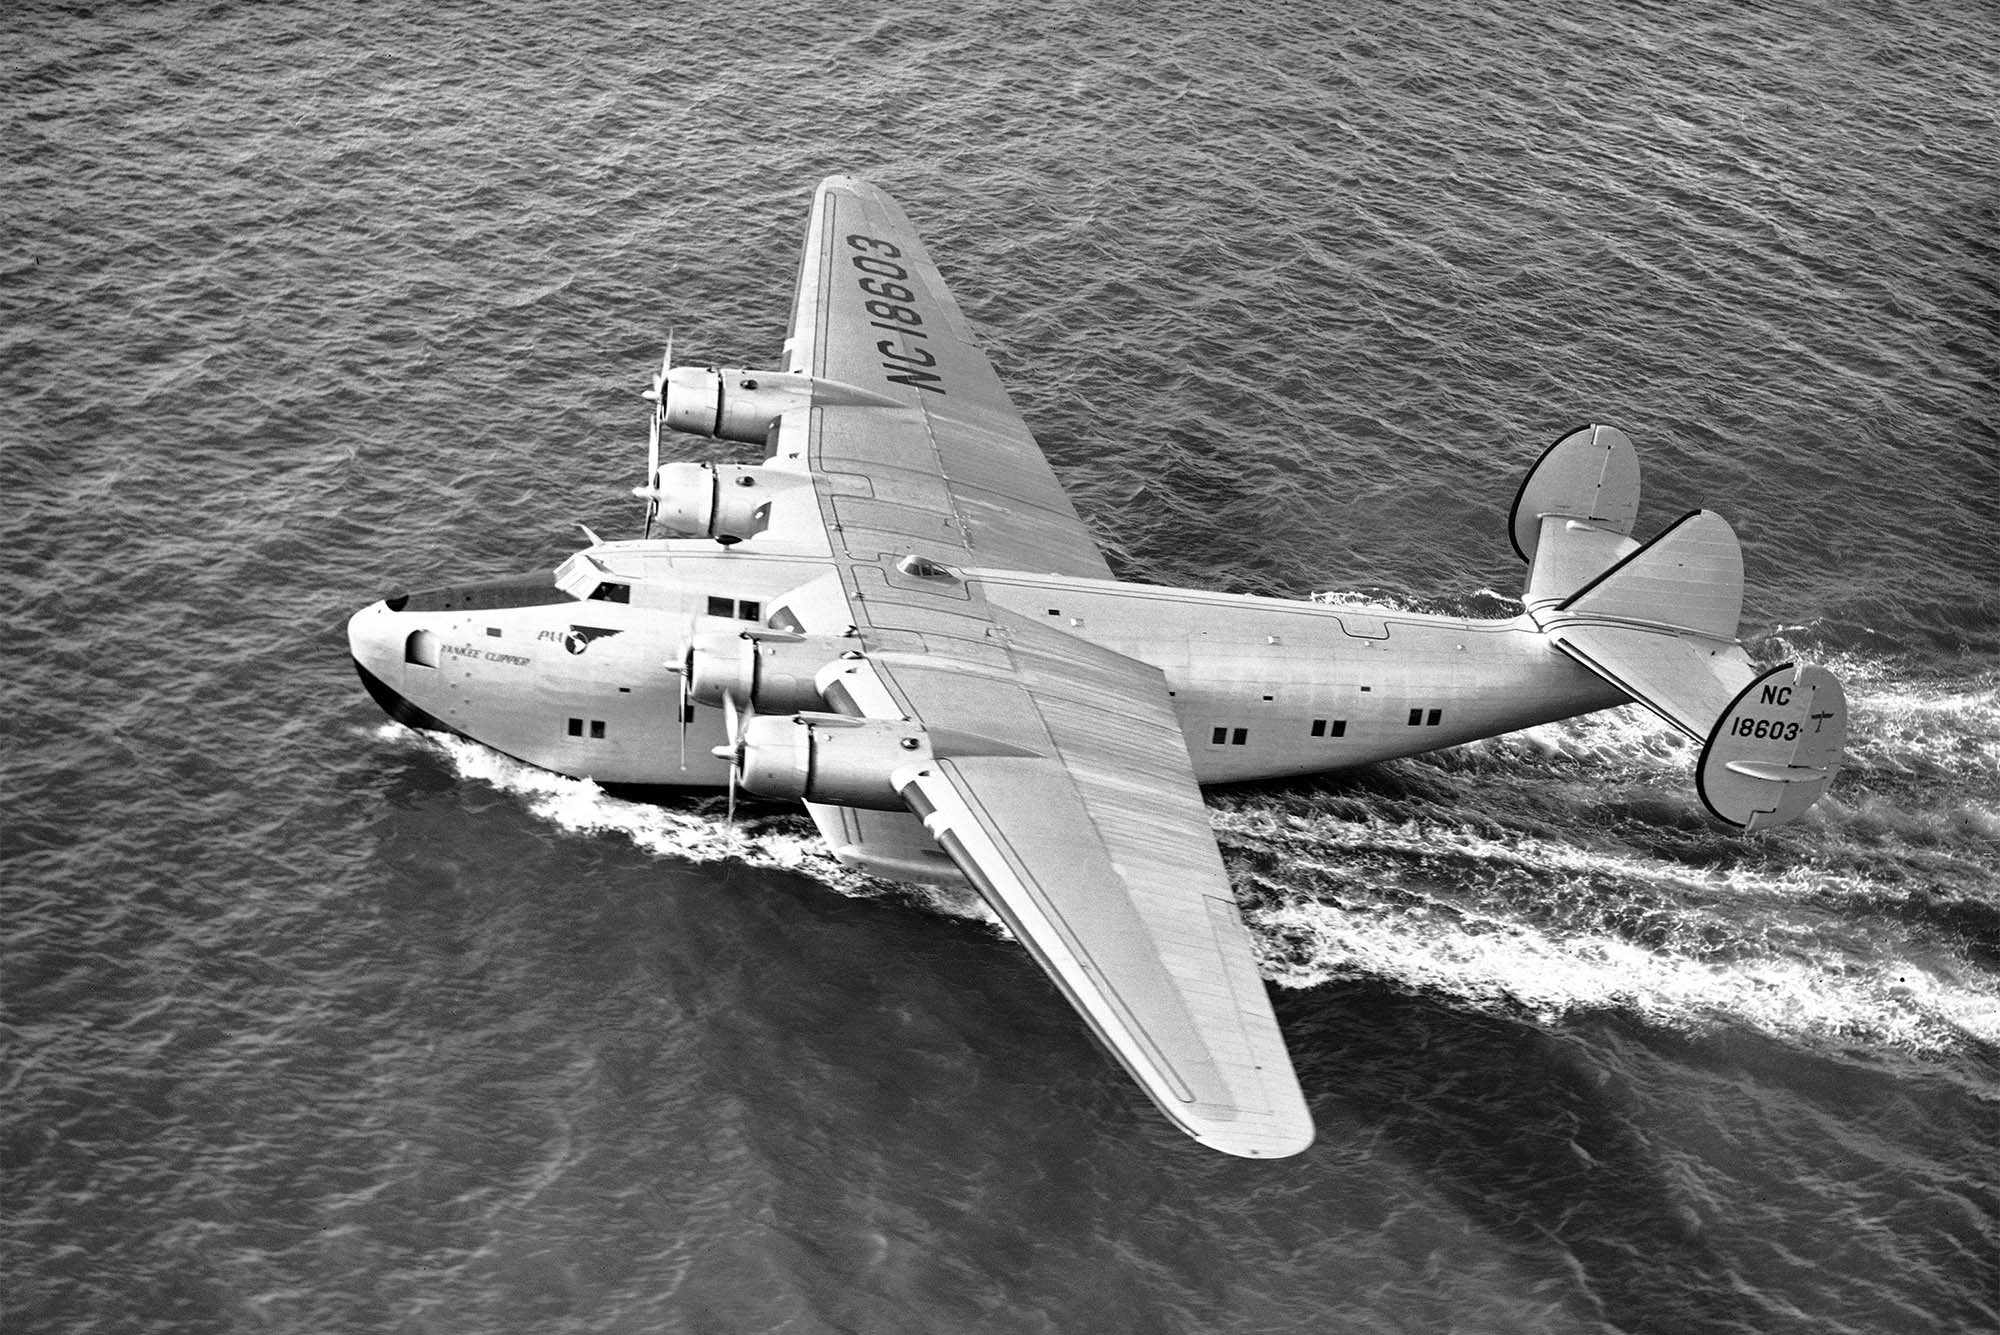 Intimate Histories from the Crash of Pan Am's Yankee Clipper 